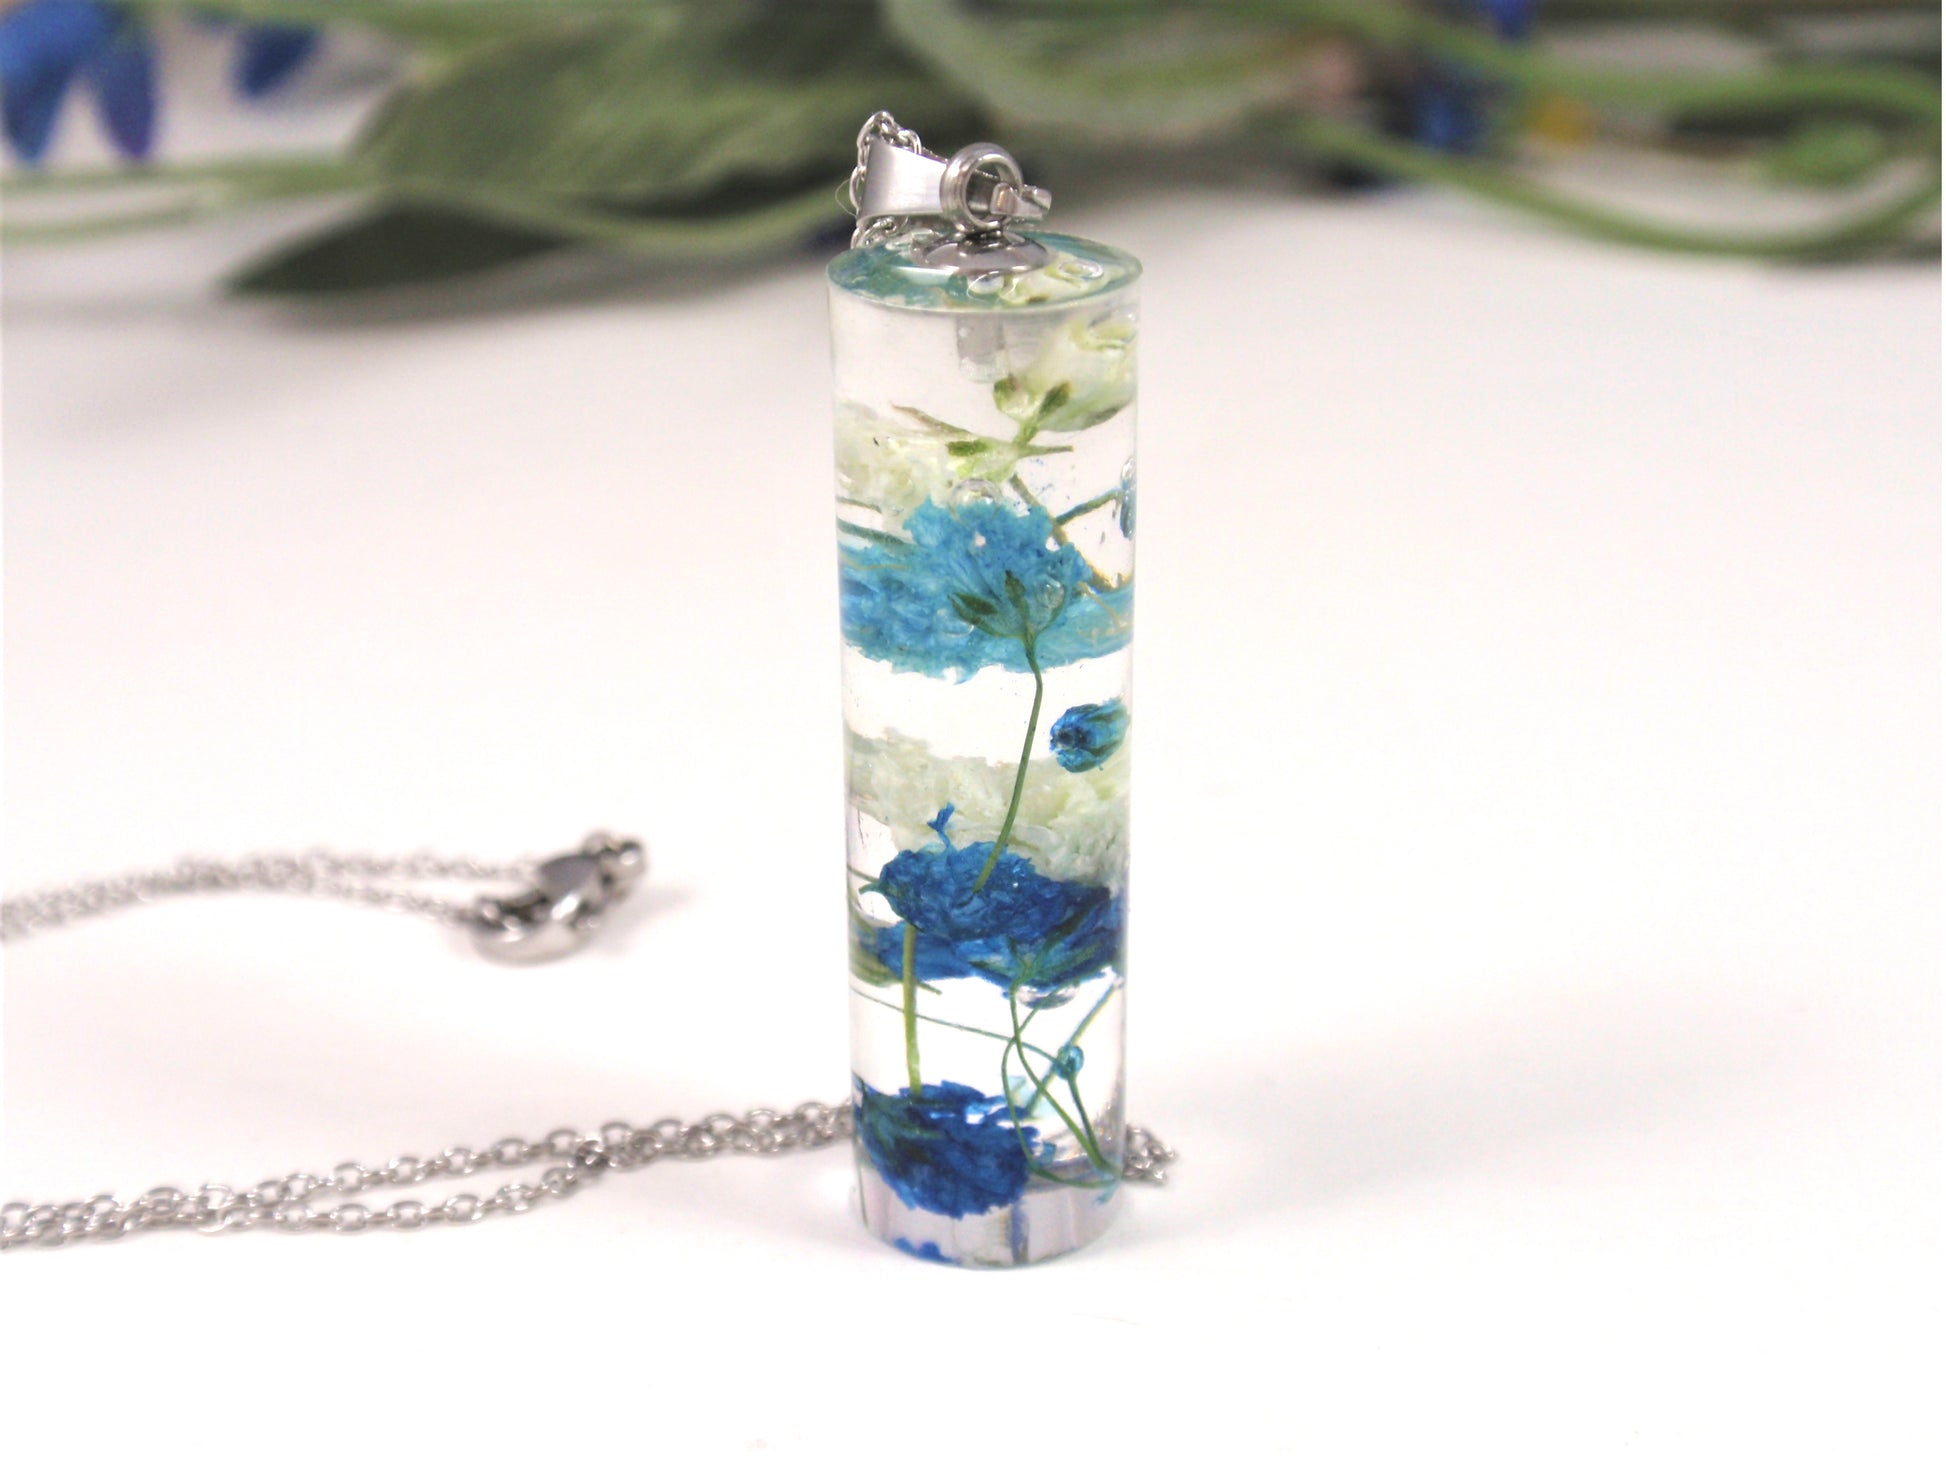 1410 Incredibly Delicate Petals In This Blue And Teal Resin Flower